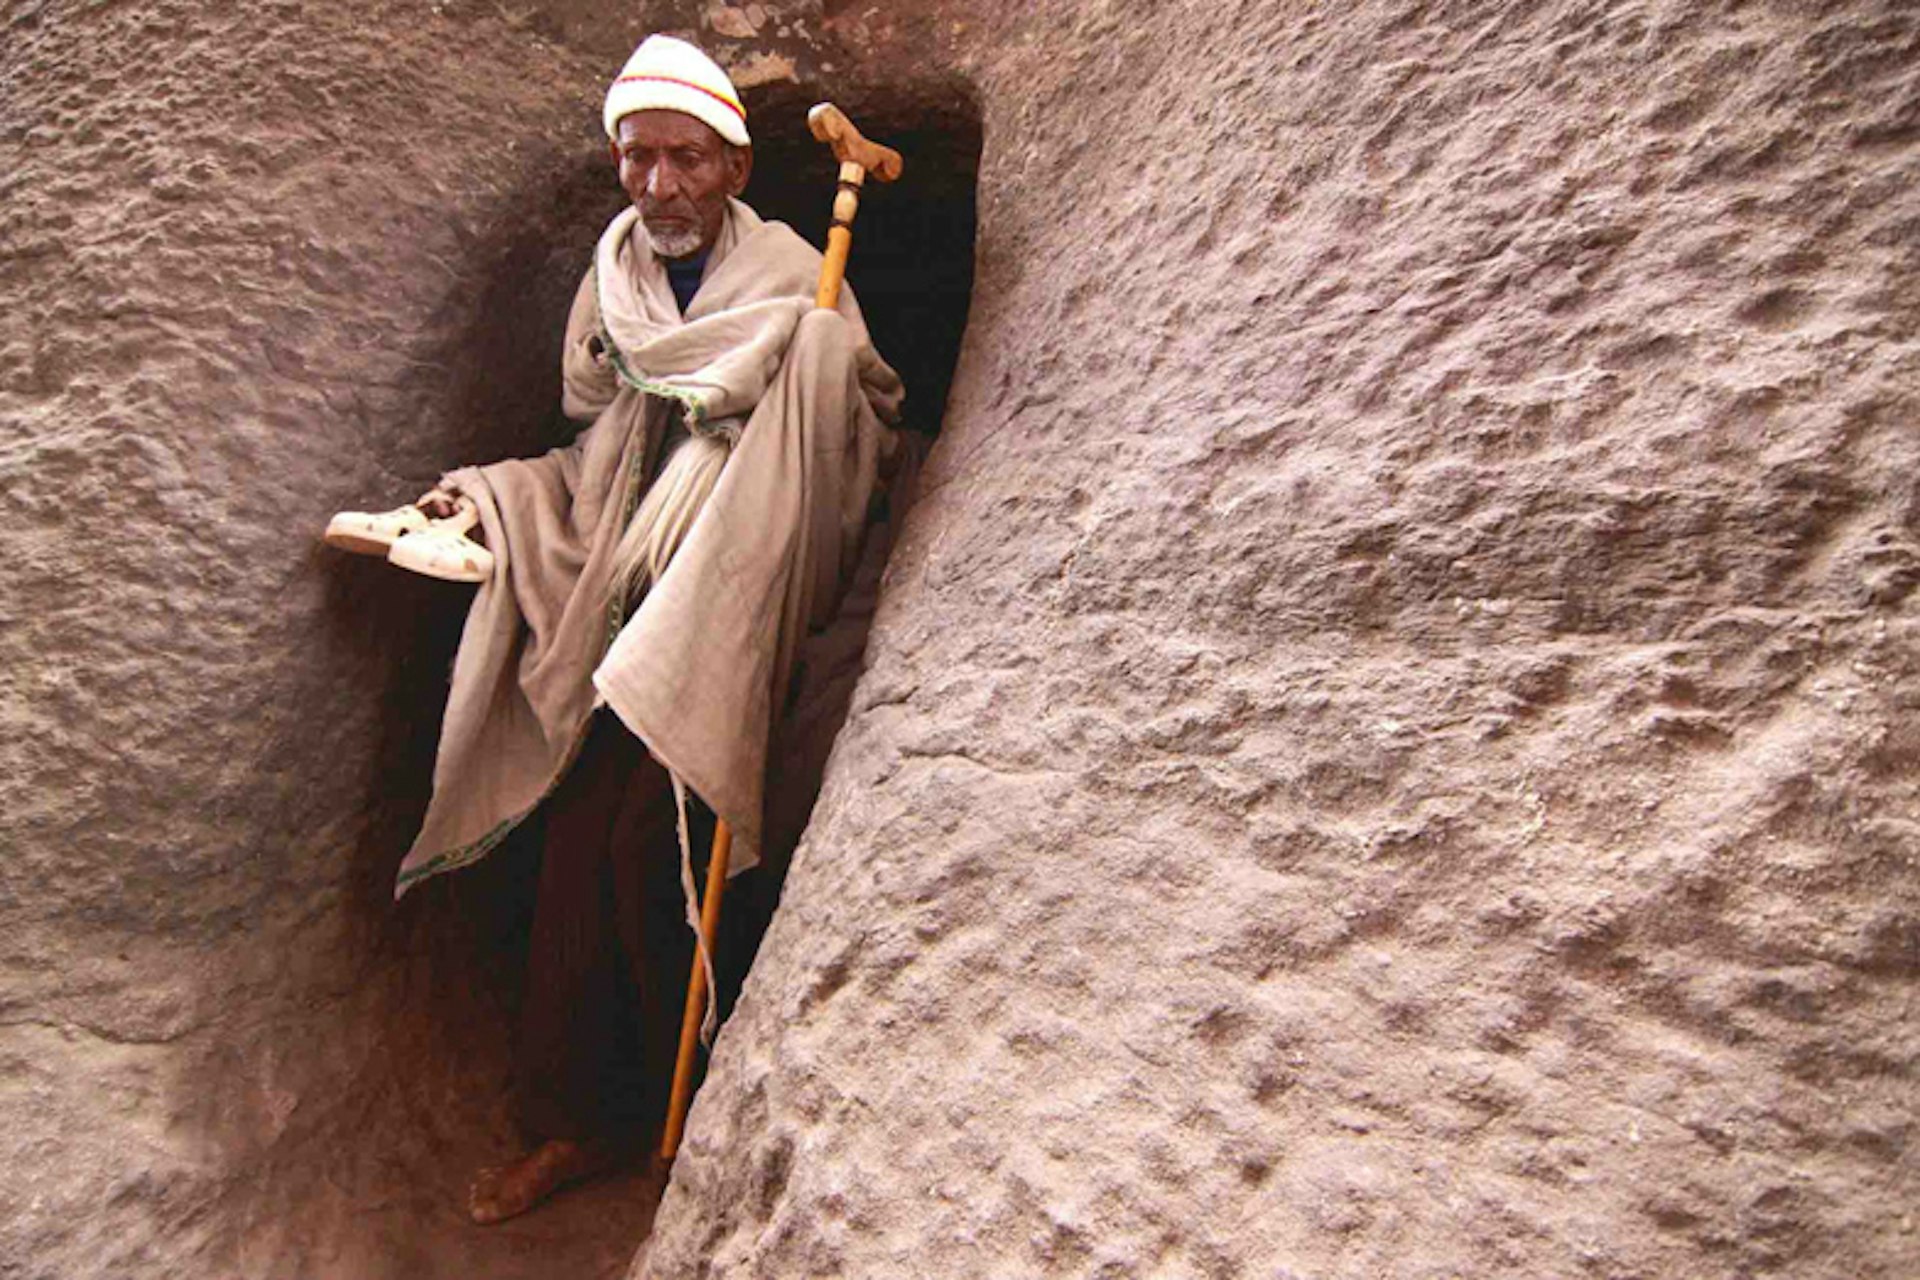 Home to a dozen or so rock-hewn churches linked by tunnels and passageways Lalibela, or the new Jerusalem, is a site of great religious significance to Ethiopian Christians. Here a pilgrim emerges from a tunnel into the courtyard of a church. Image by Stuart Butler / Lonely Planet.